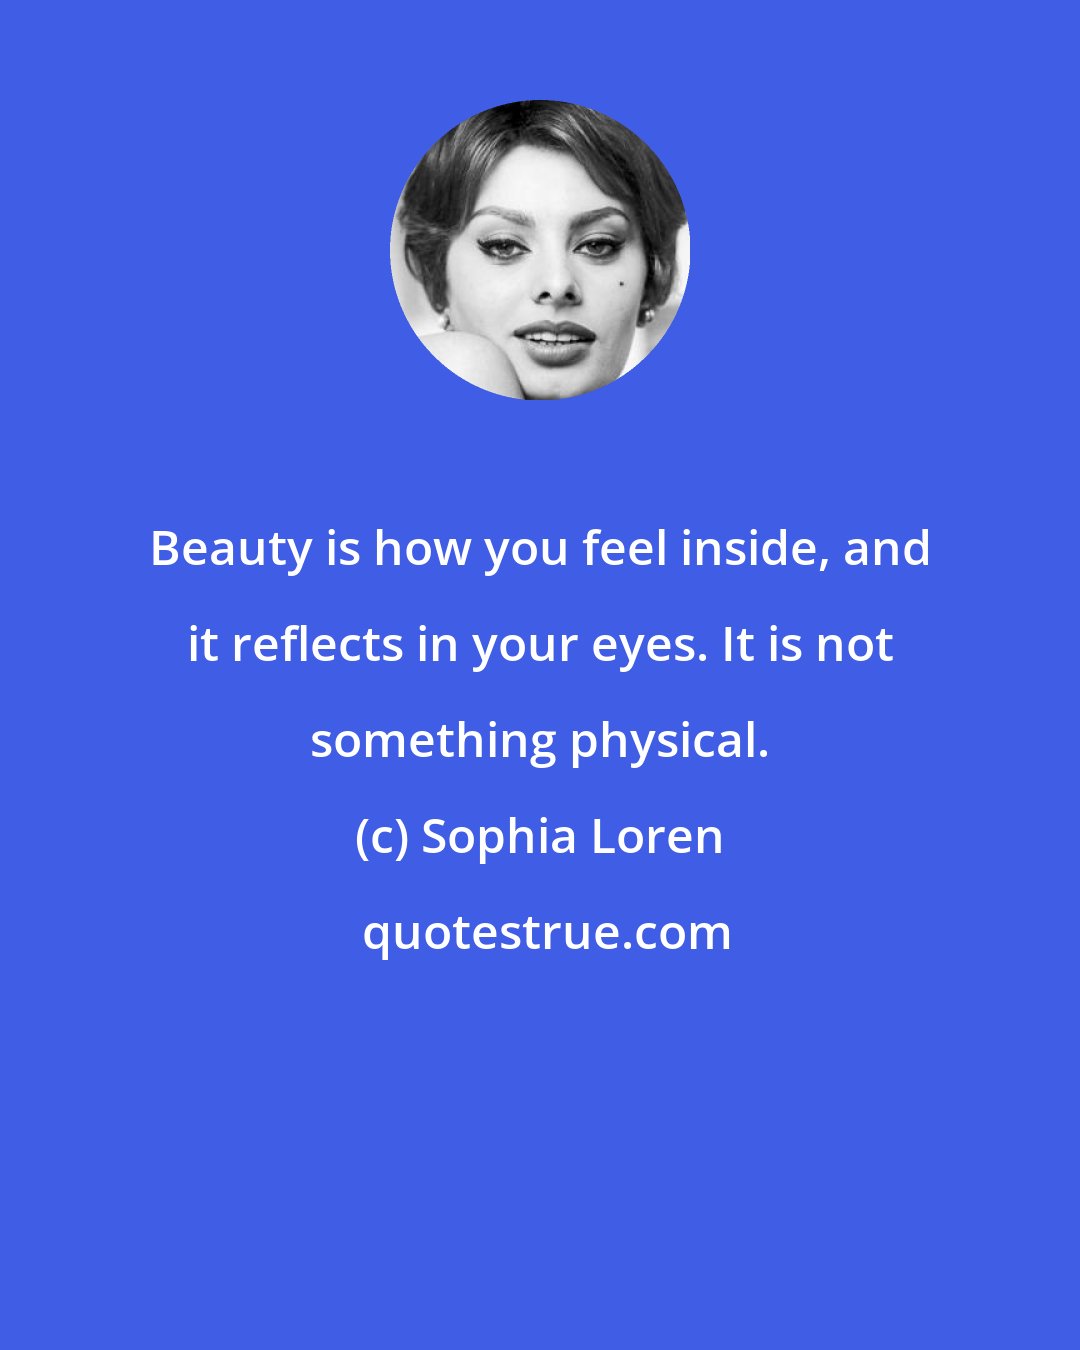 Sophia Loren: Beauty is how you feel inside, and it reflects in your eyes. It is not something physical.